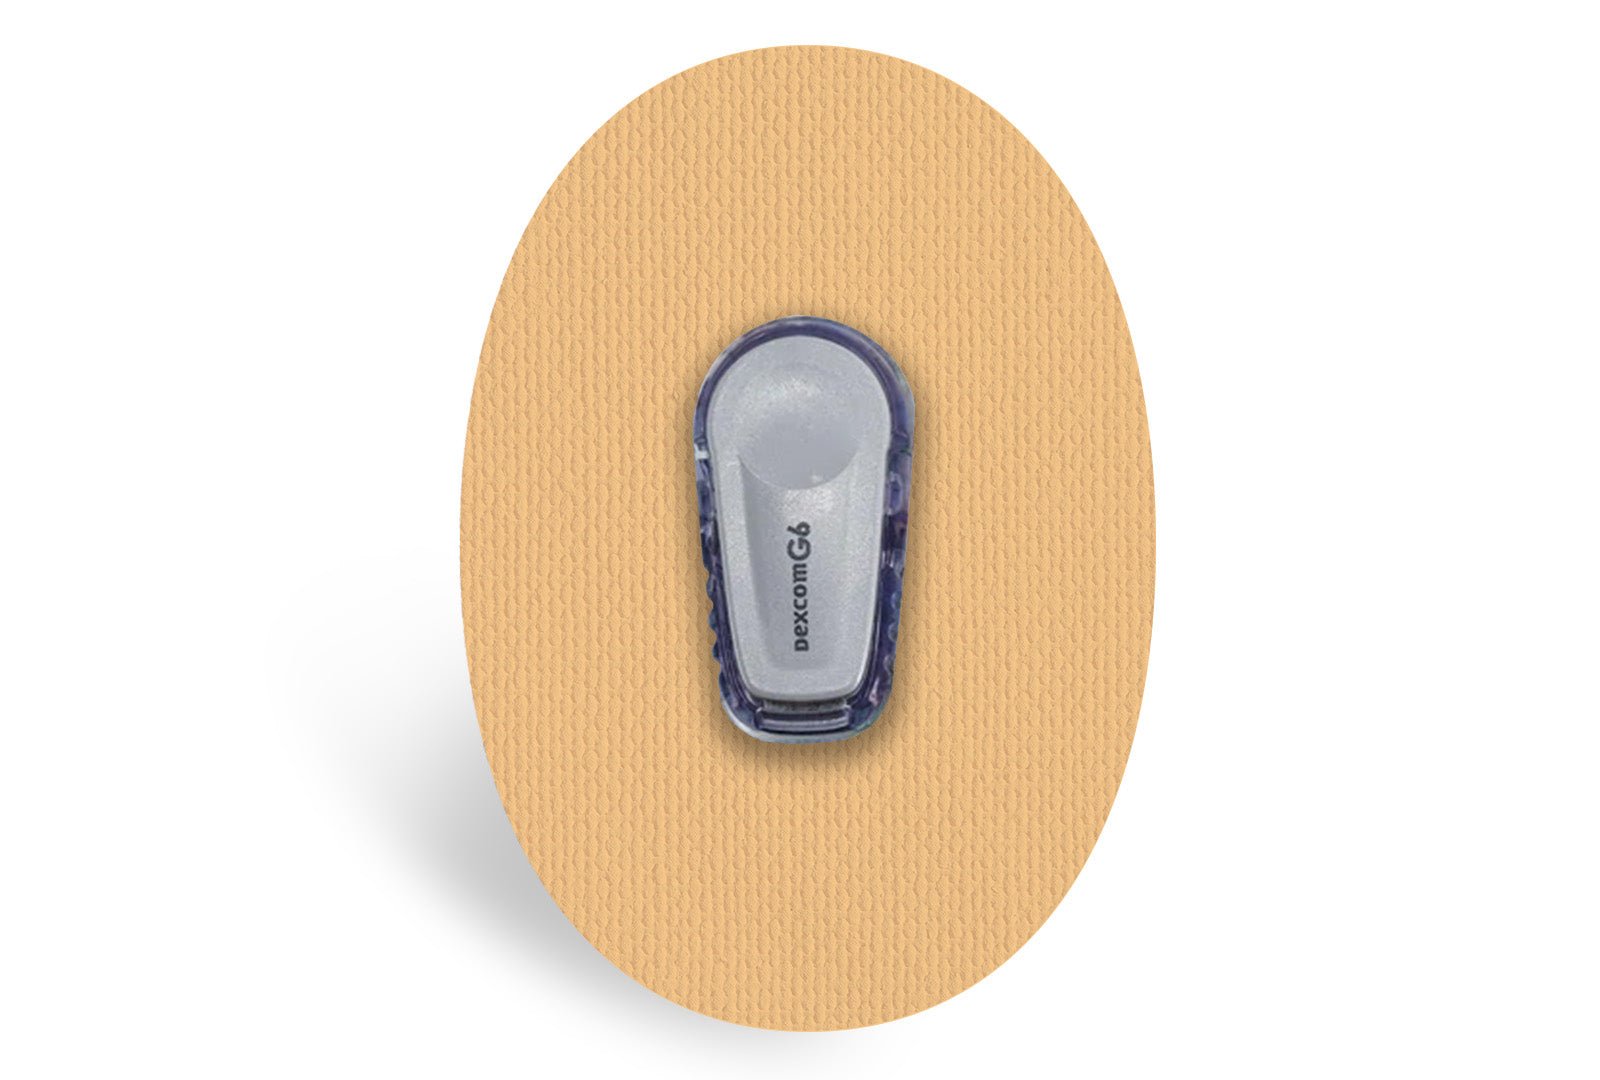 Shop Brilliant Baubles Patch - Dexcom G6 today - Protect your CGM - Trusted  by thousands like you – Type One Style